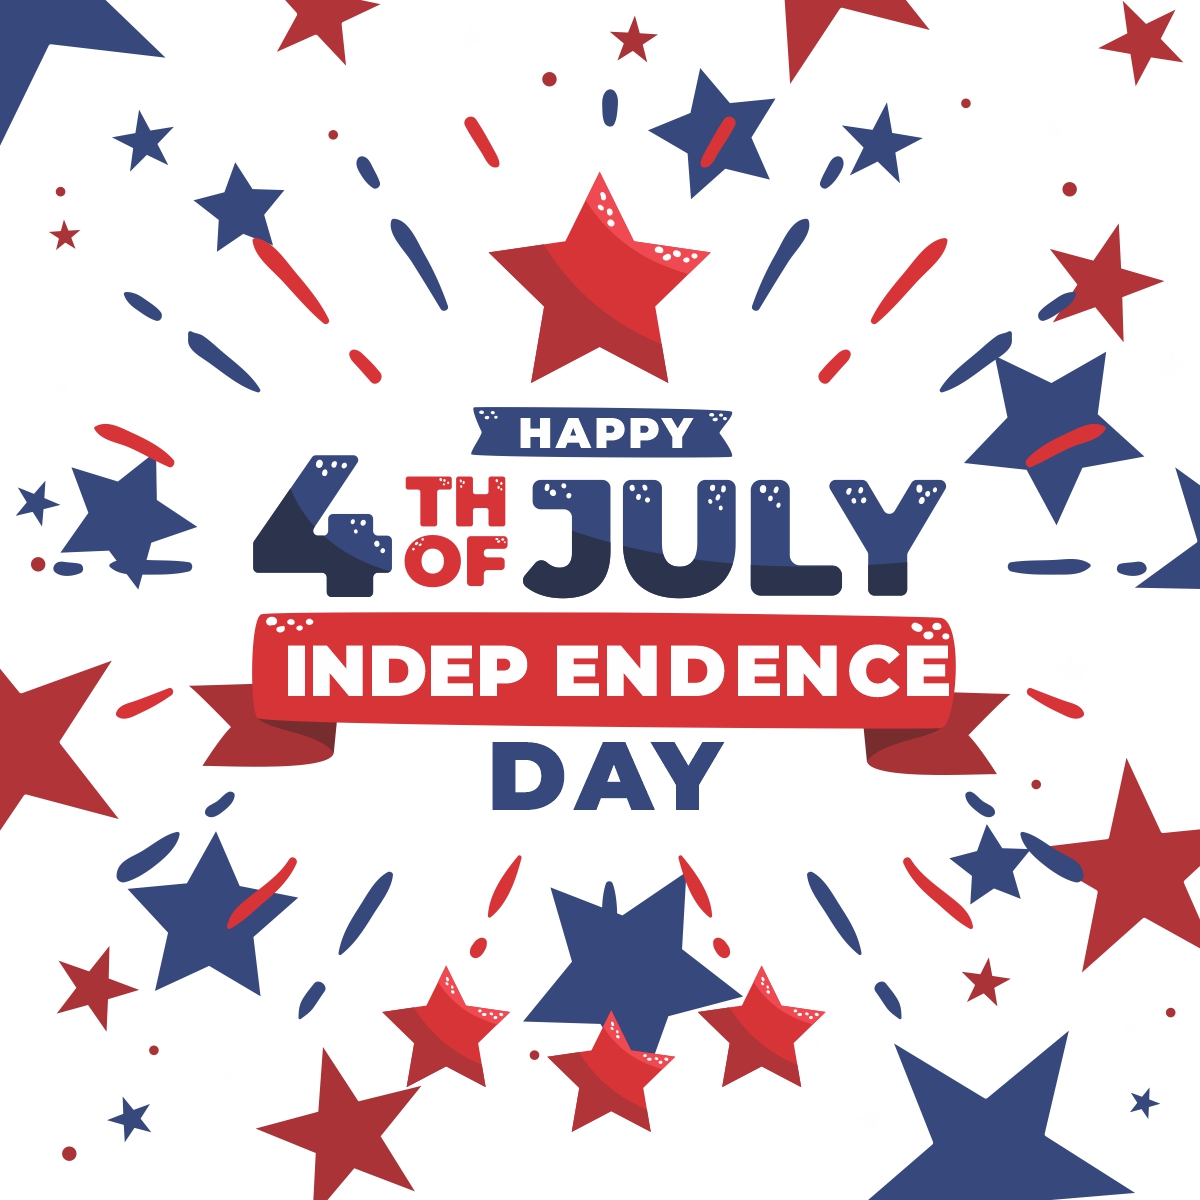 4 July USA happy independence day for social media poster design download for free